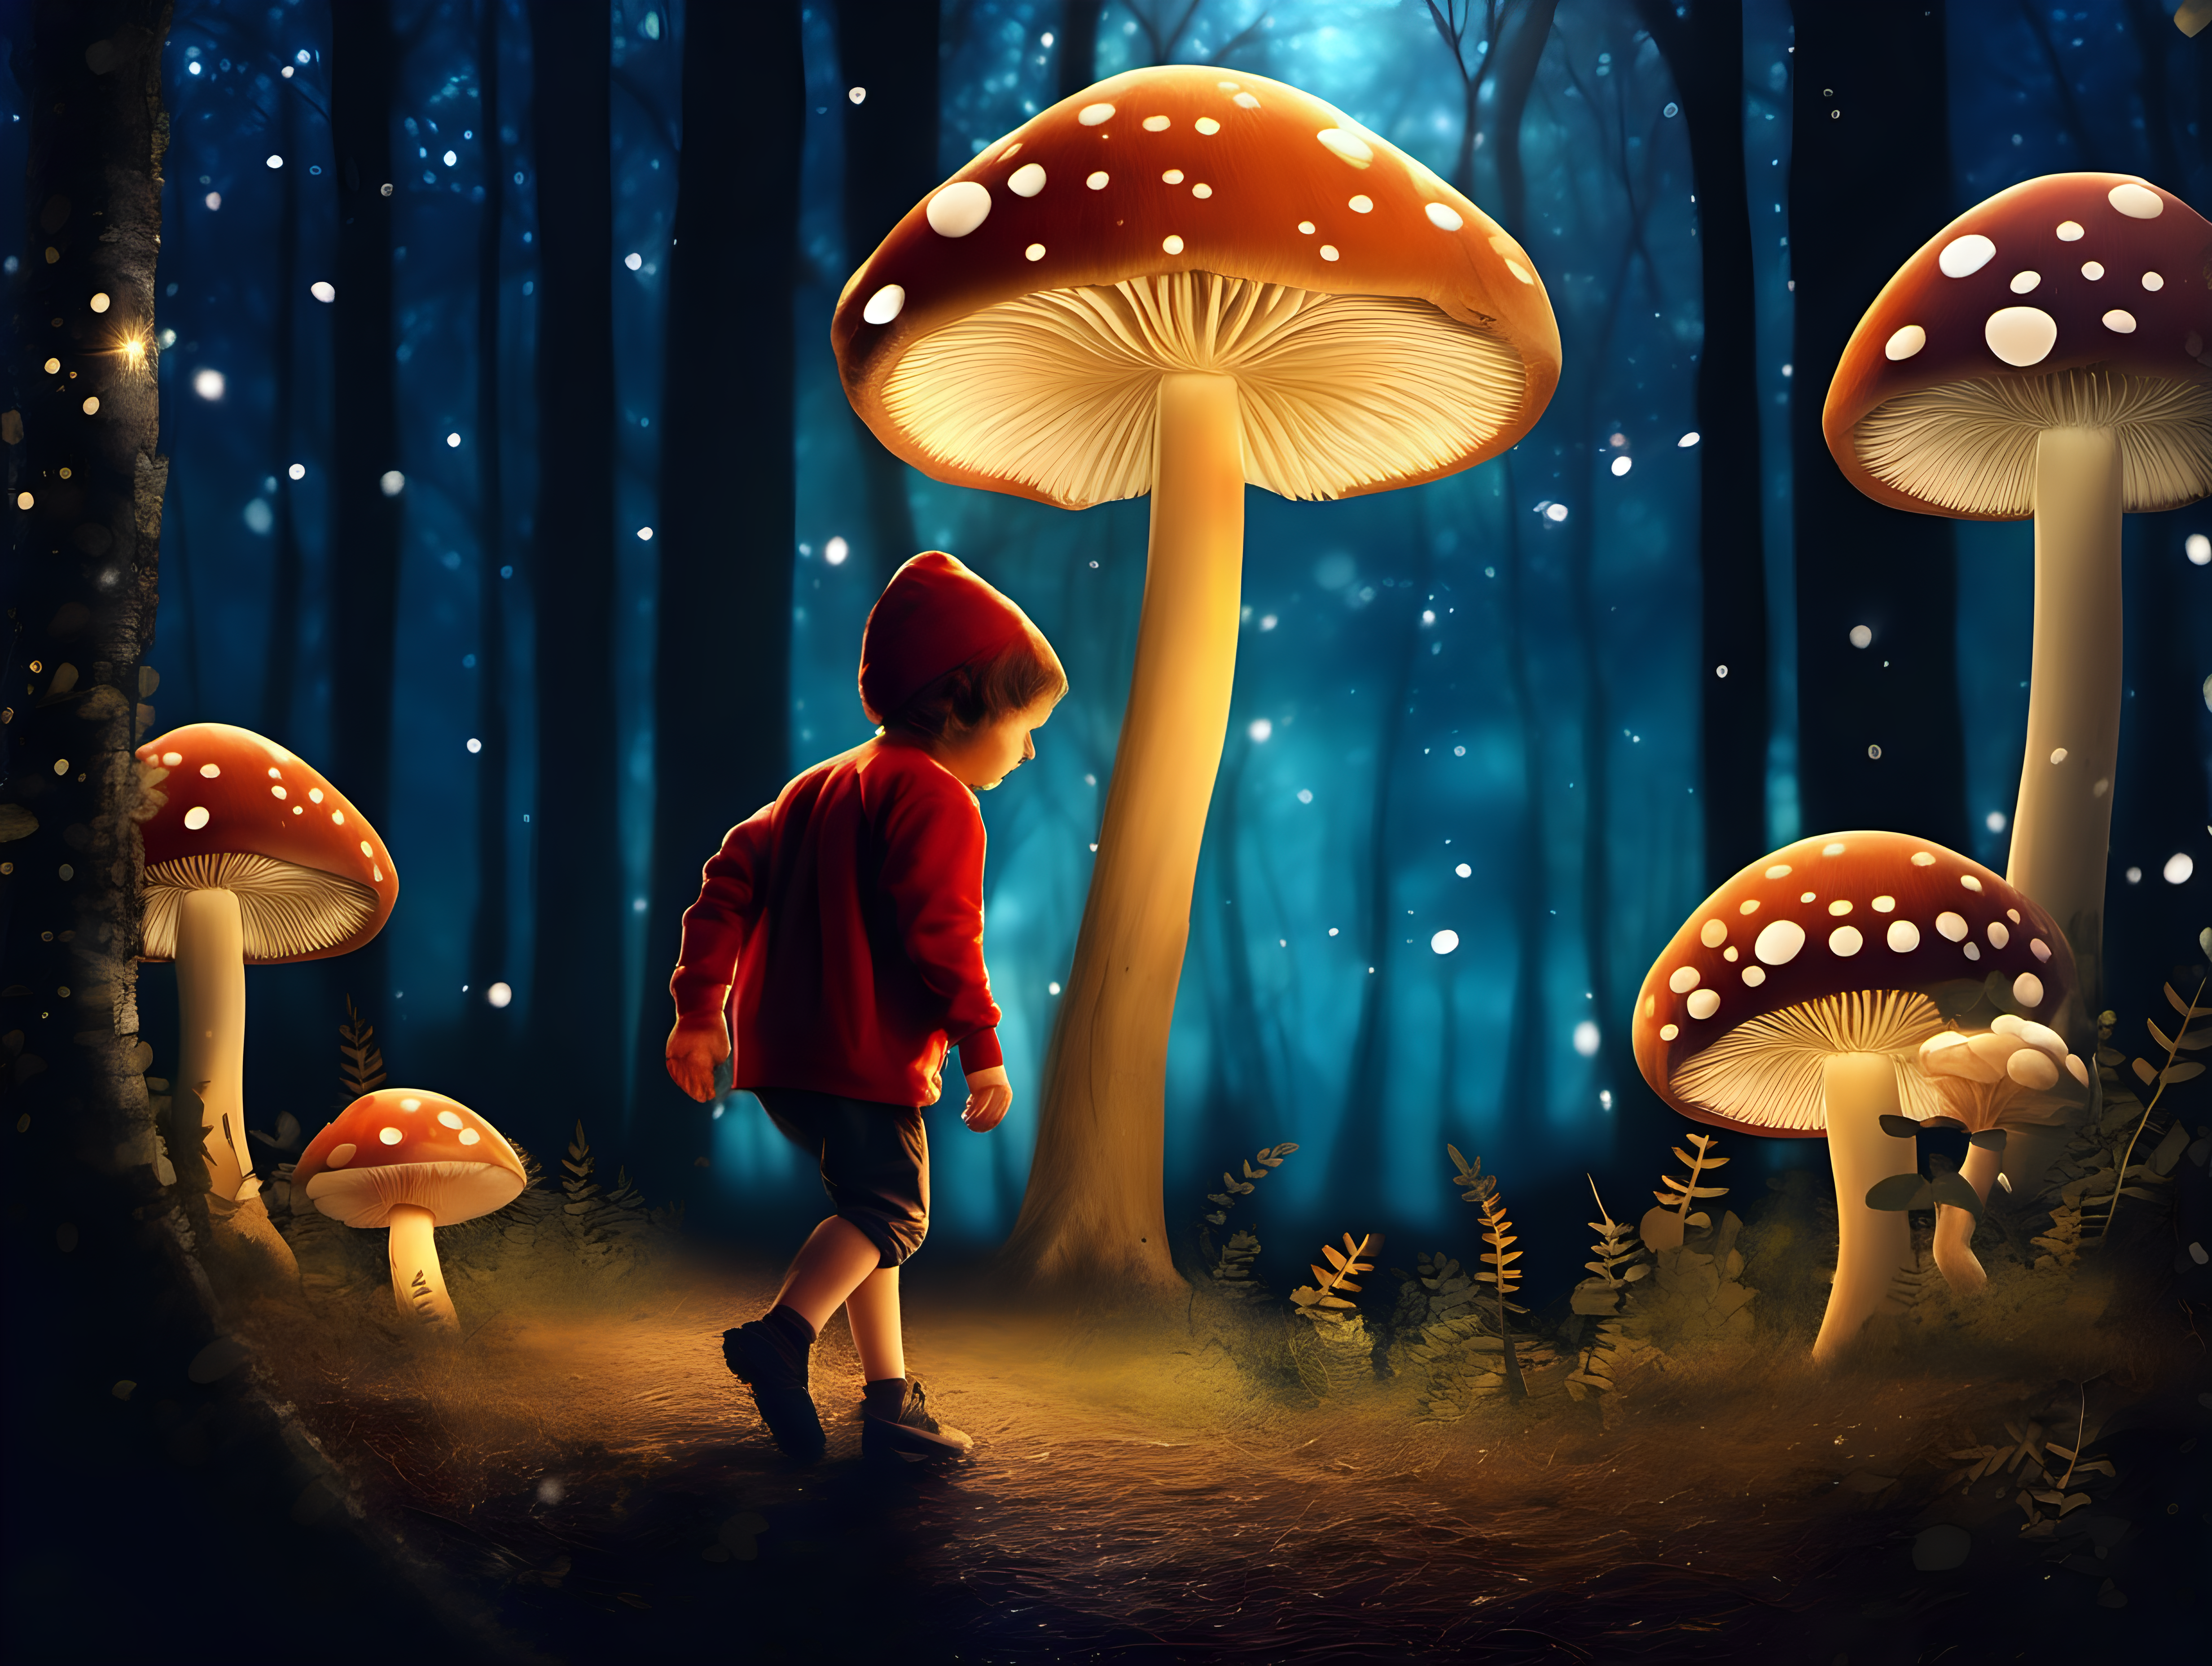 Create a image of a lost child walking in a forest at night with fireflies and glowing mushrooms